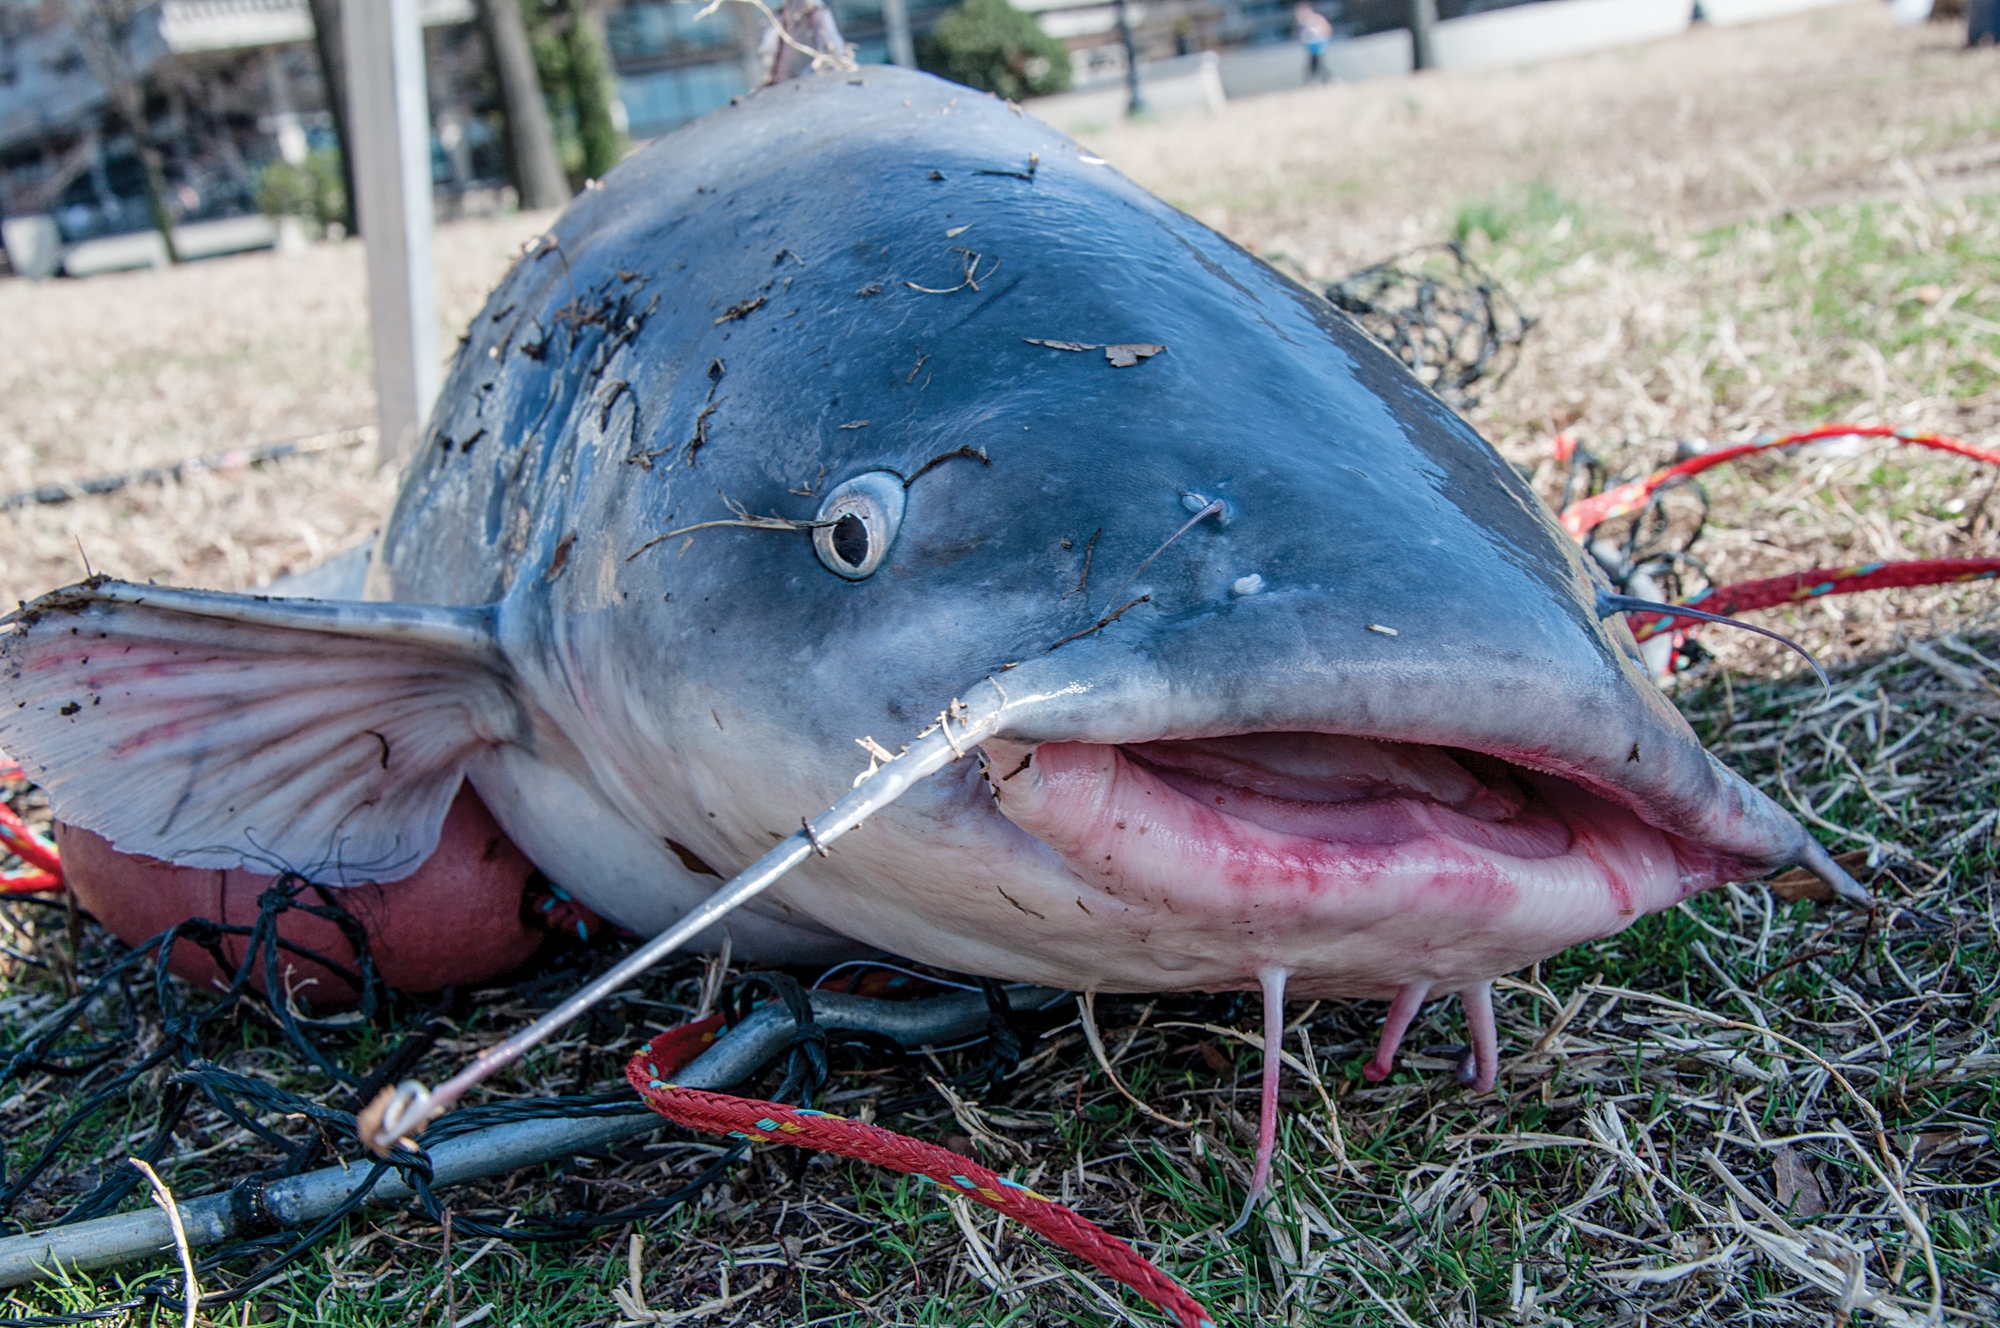 A blue catfish on the grass in Washington D.C.